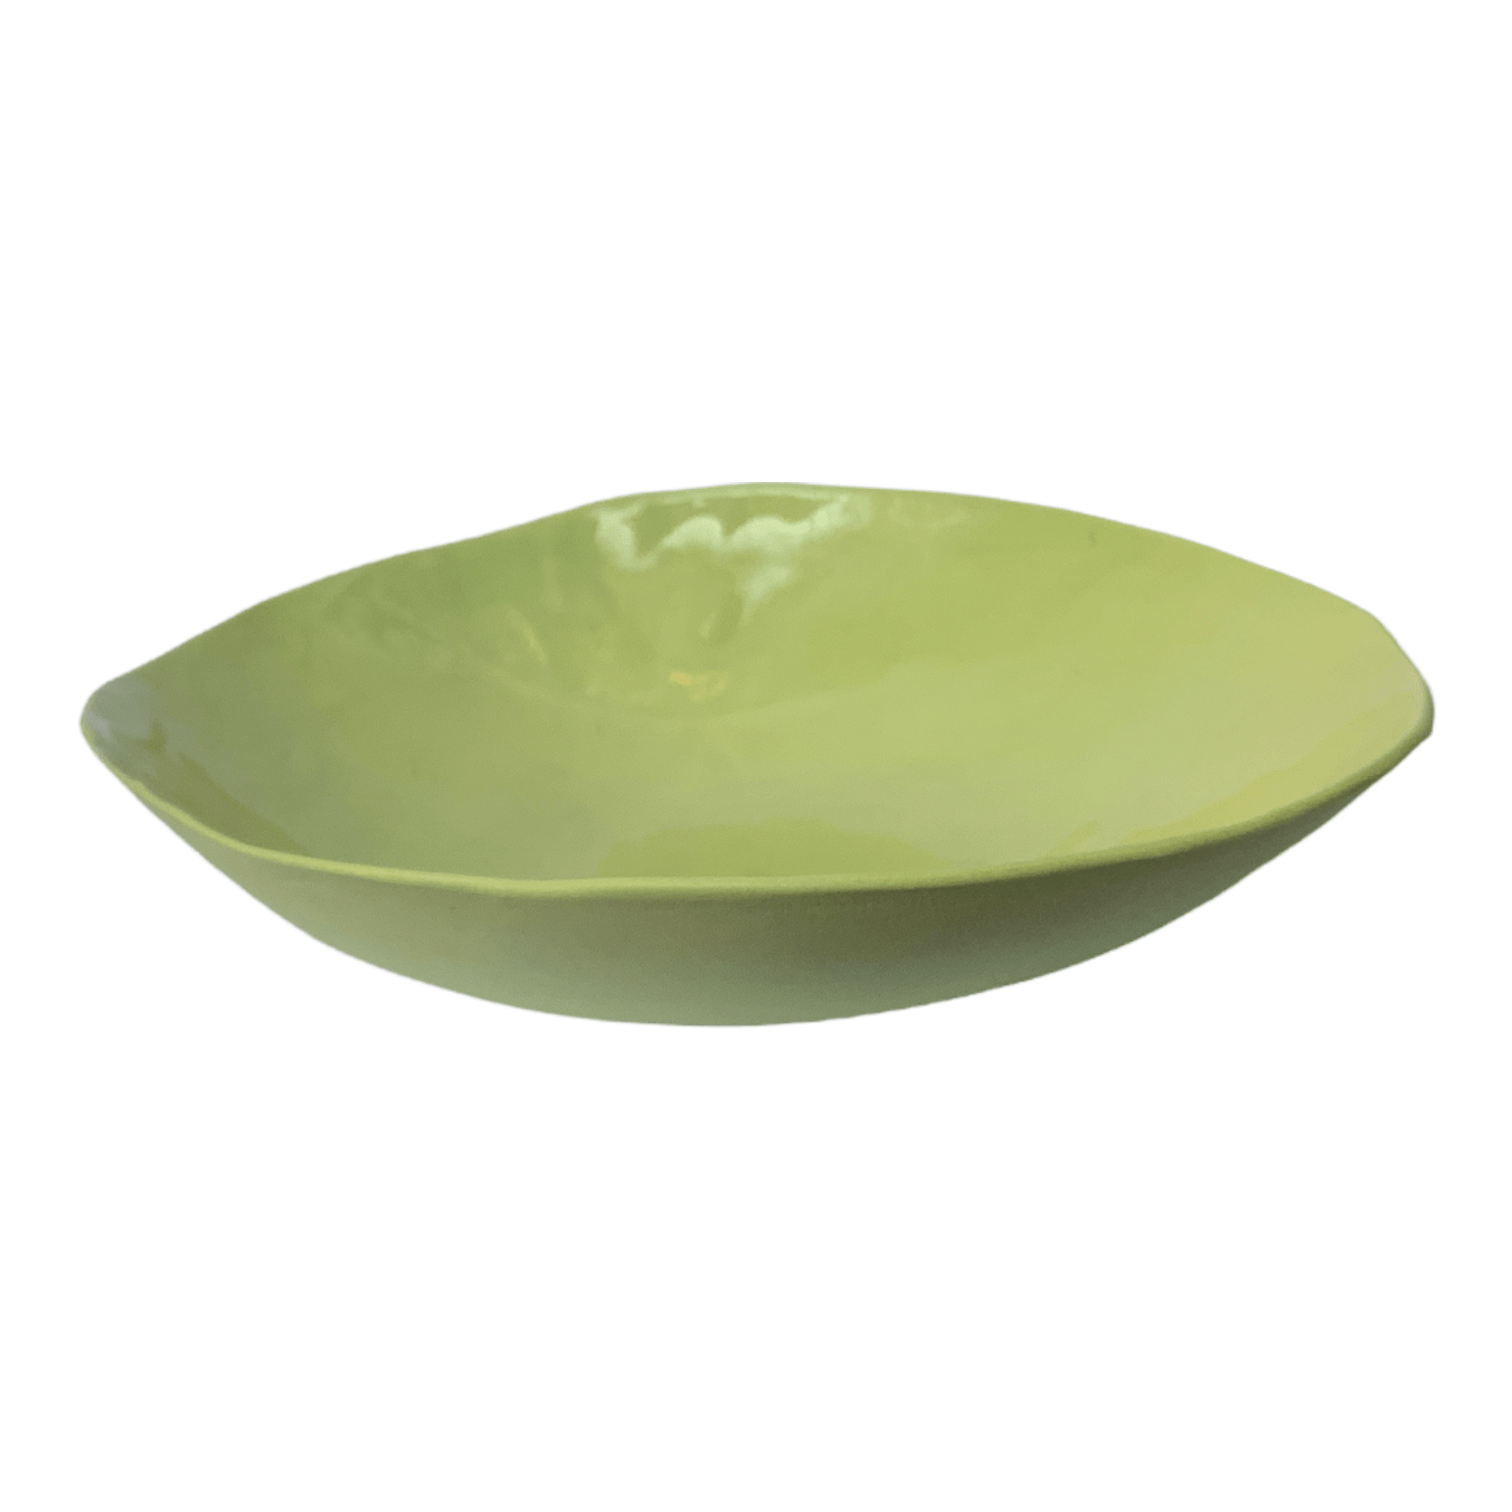 Side on view of a green ceramic bowl.